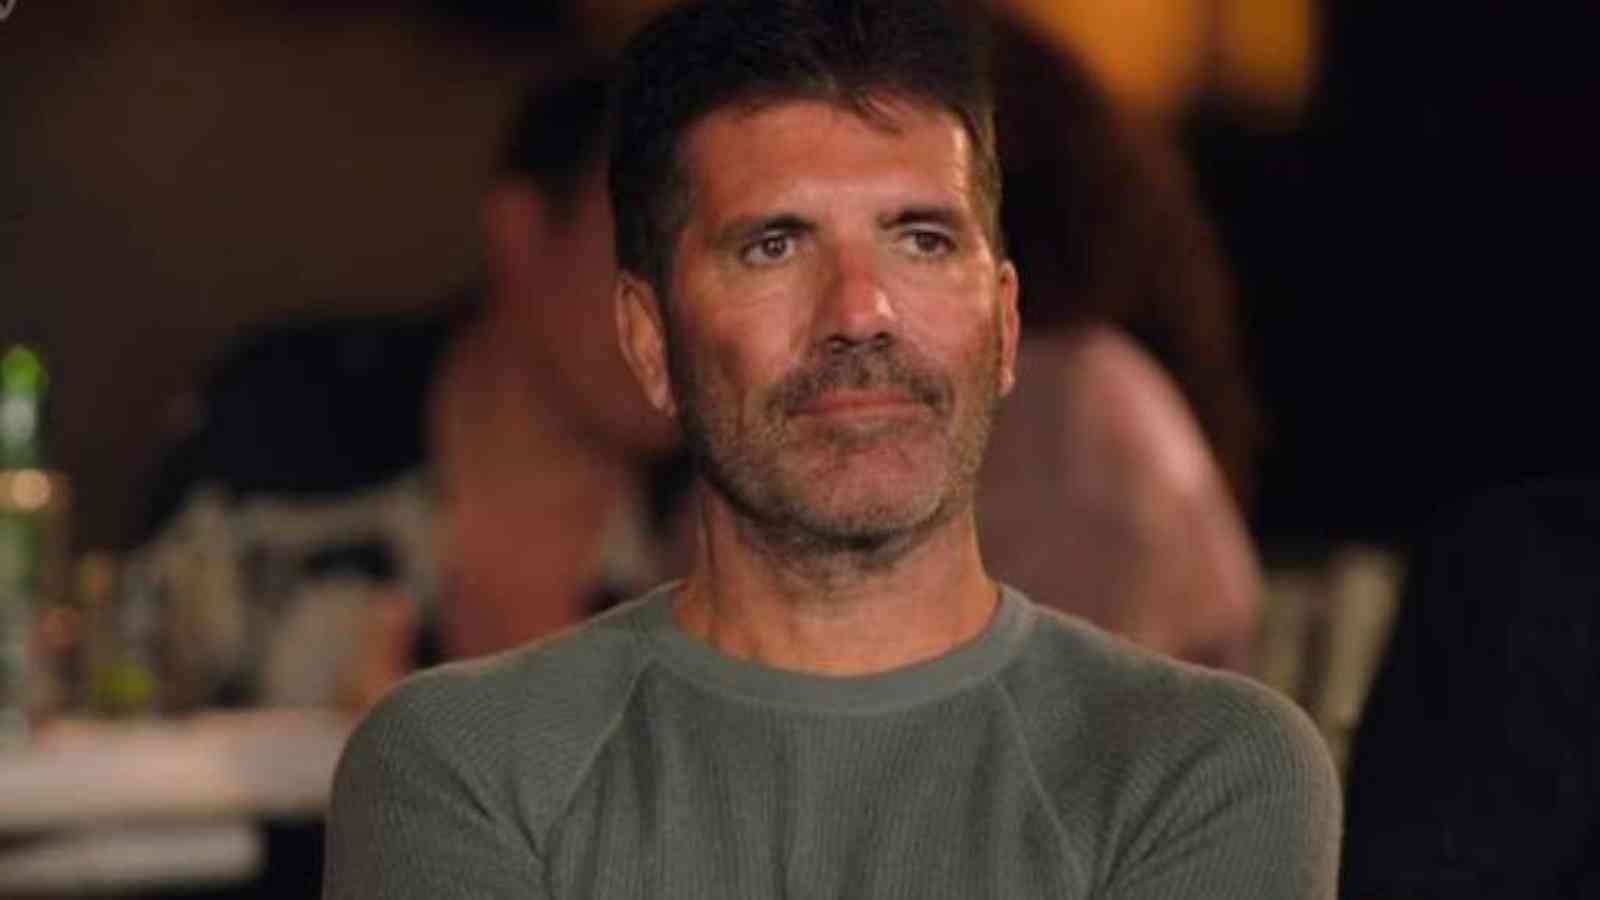 Simon Cowell Illness What Happened To Him